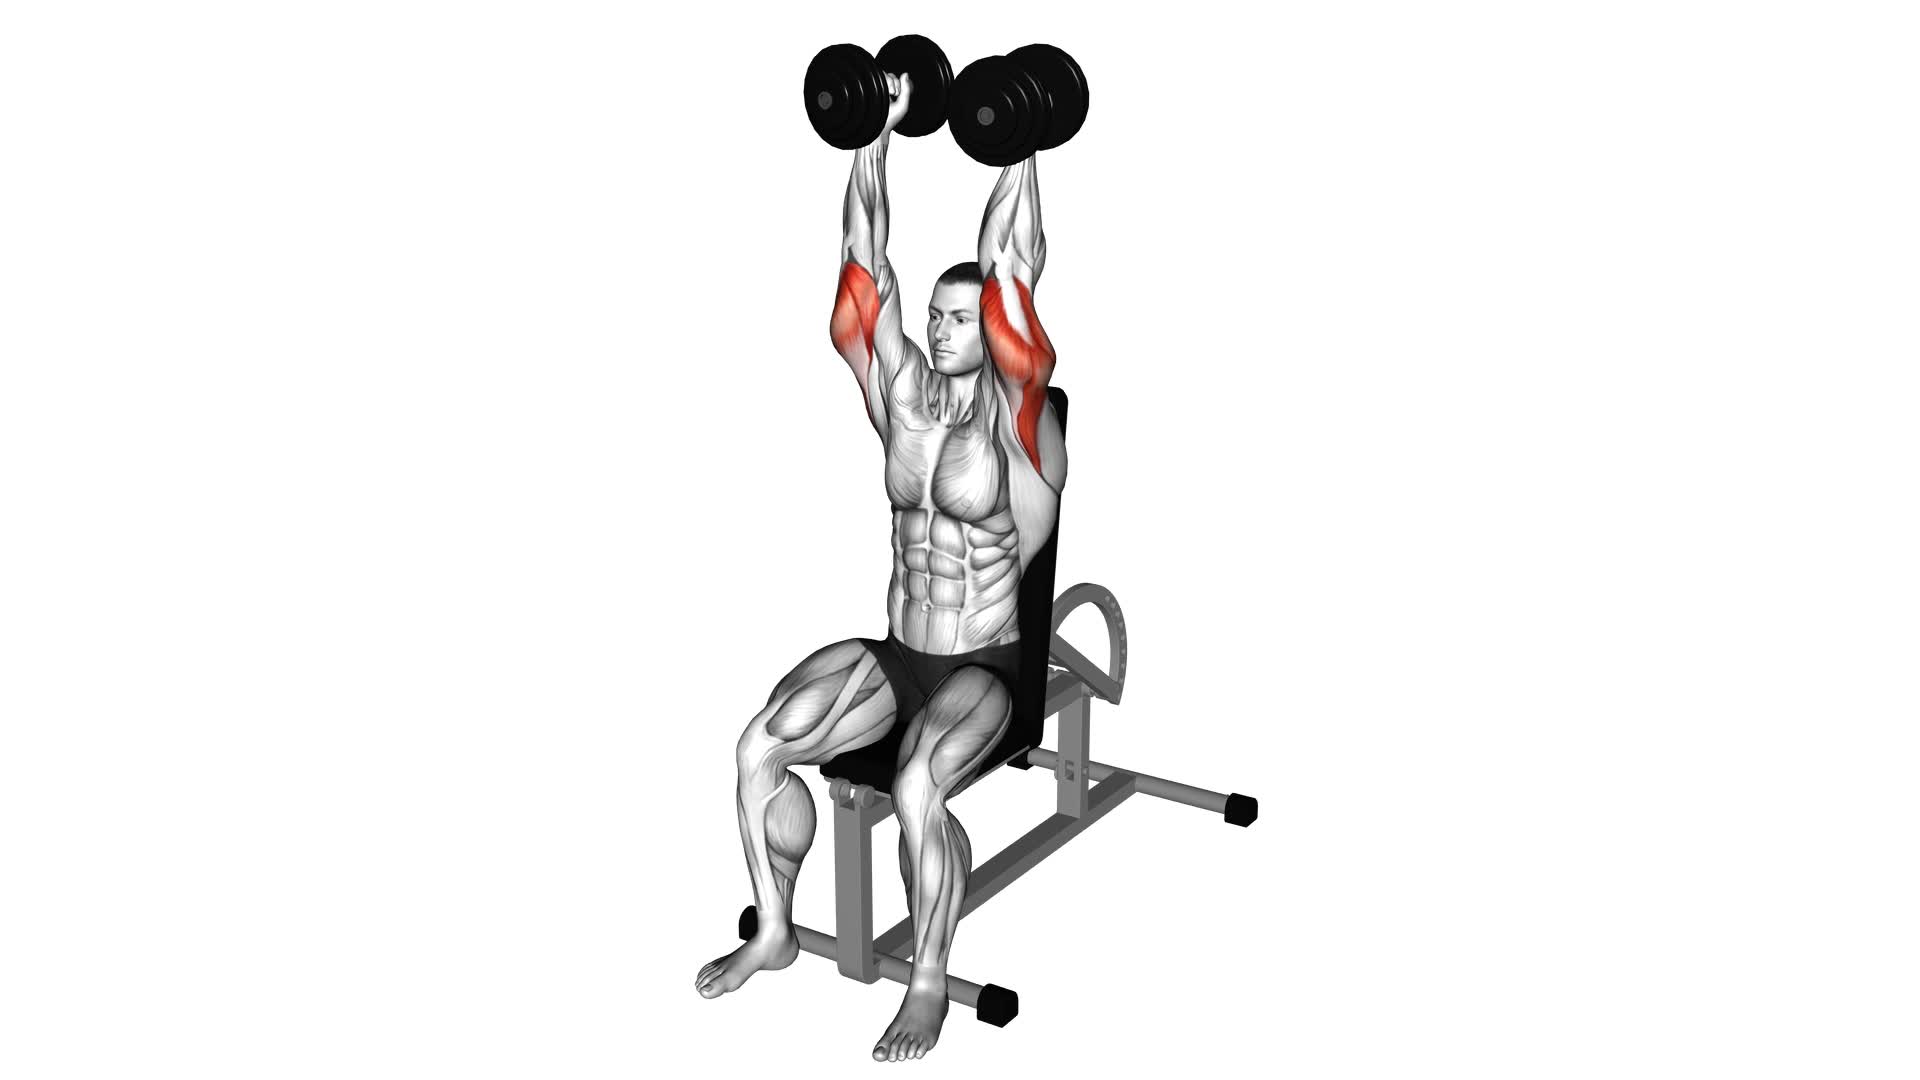 Dumbbells Seated Triceps Extension - Video Exercise Guide & Tips